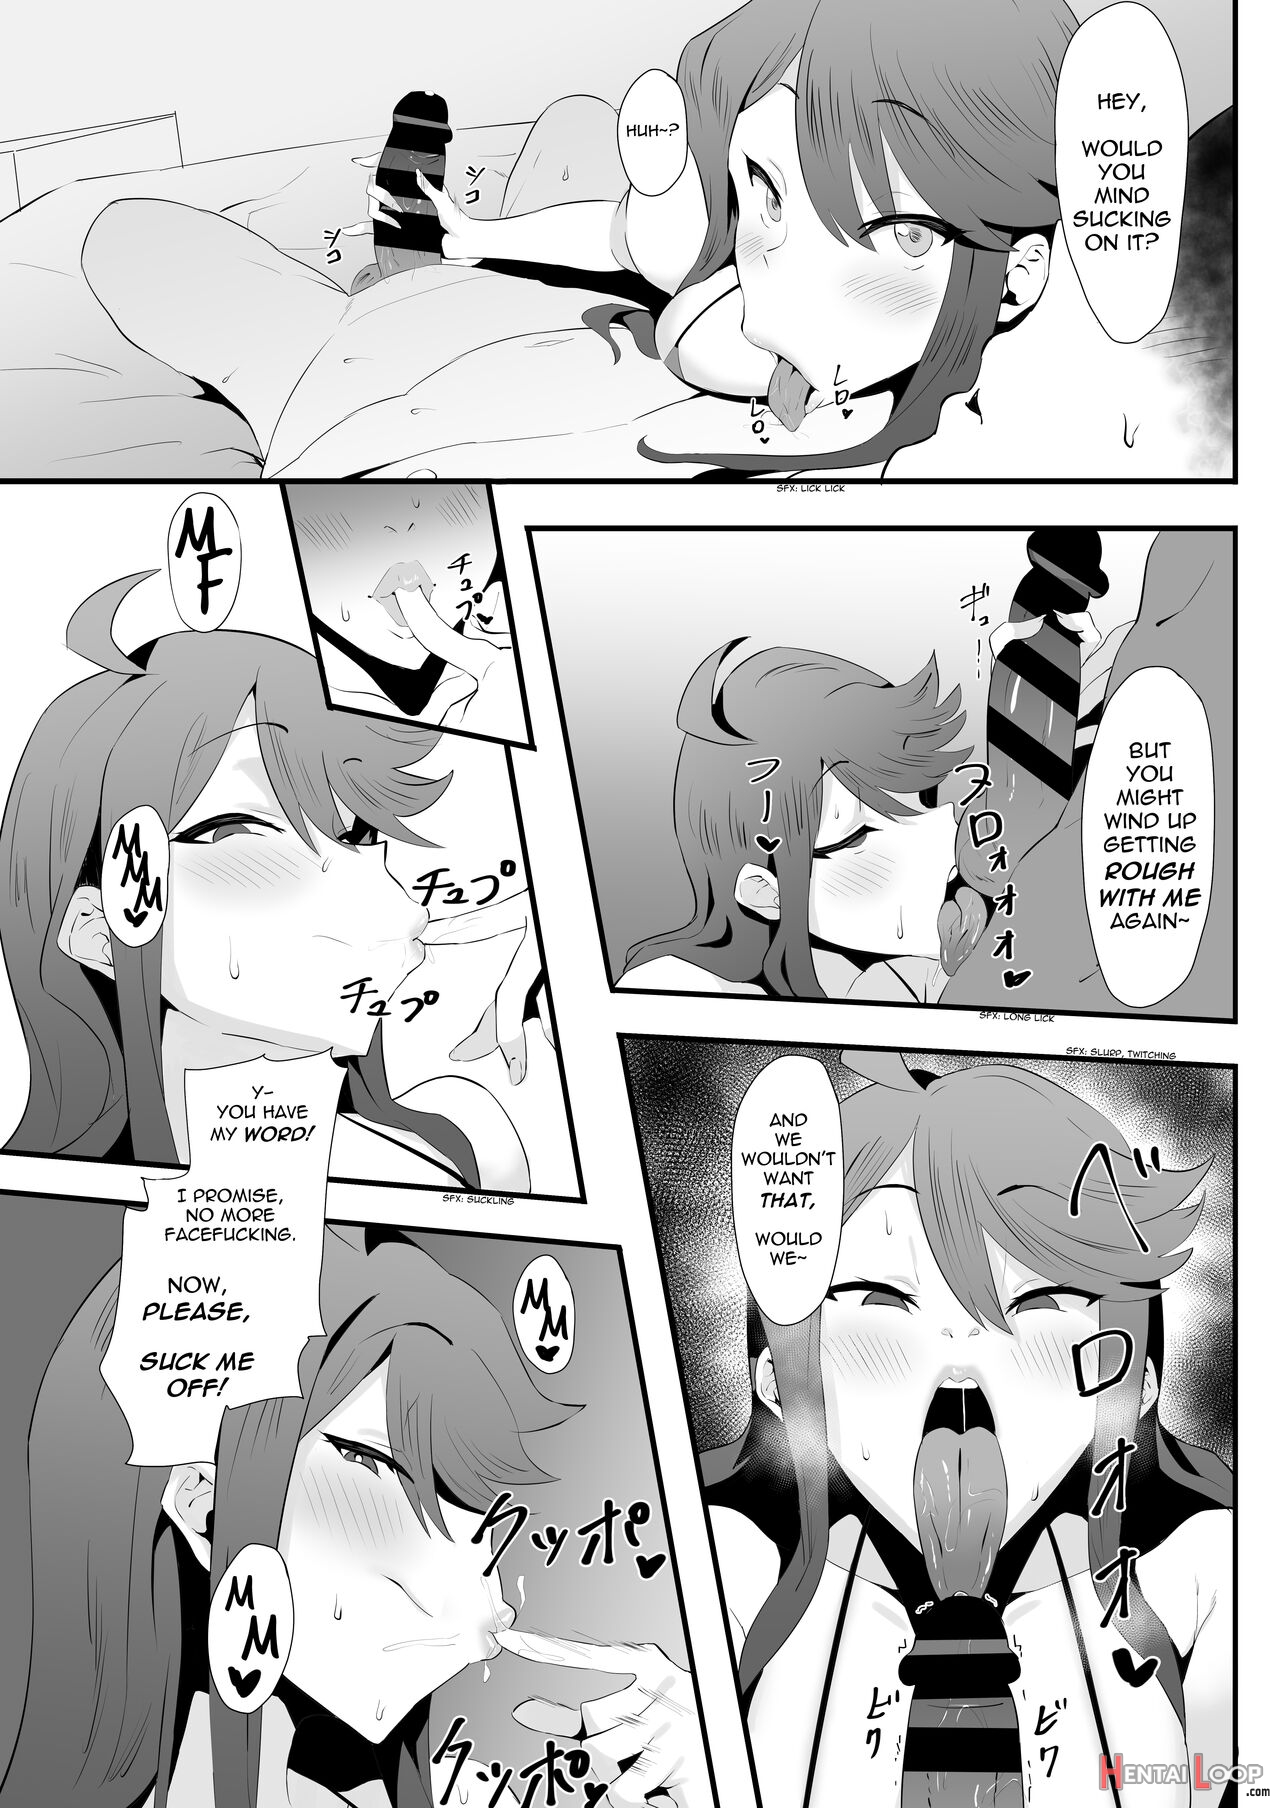 Head-to-head Blowjob Battle With A Gal Idol page 10